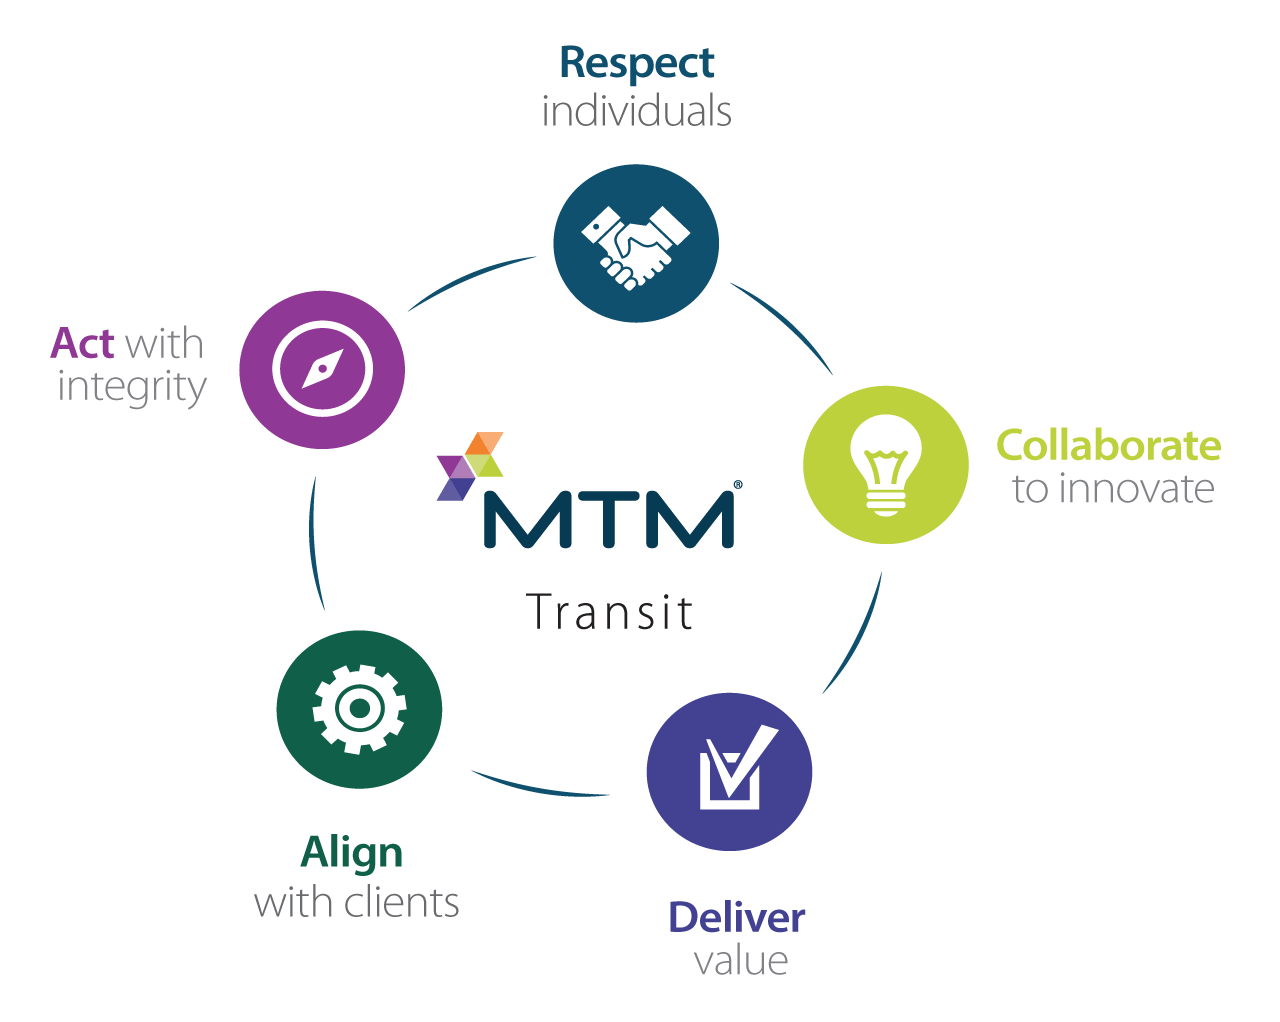 Image shows MTM Transit’s 5 Core Values. Our Core Values, along with our Total Rewards Program, are three reasons why you should consider a career at MTM Transit.